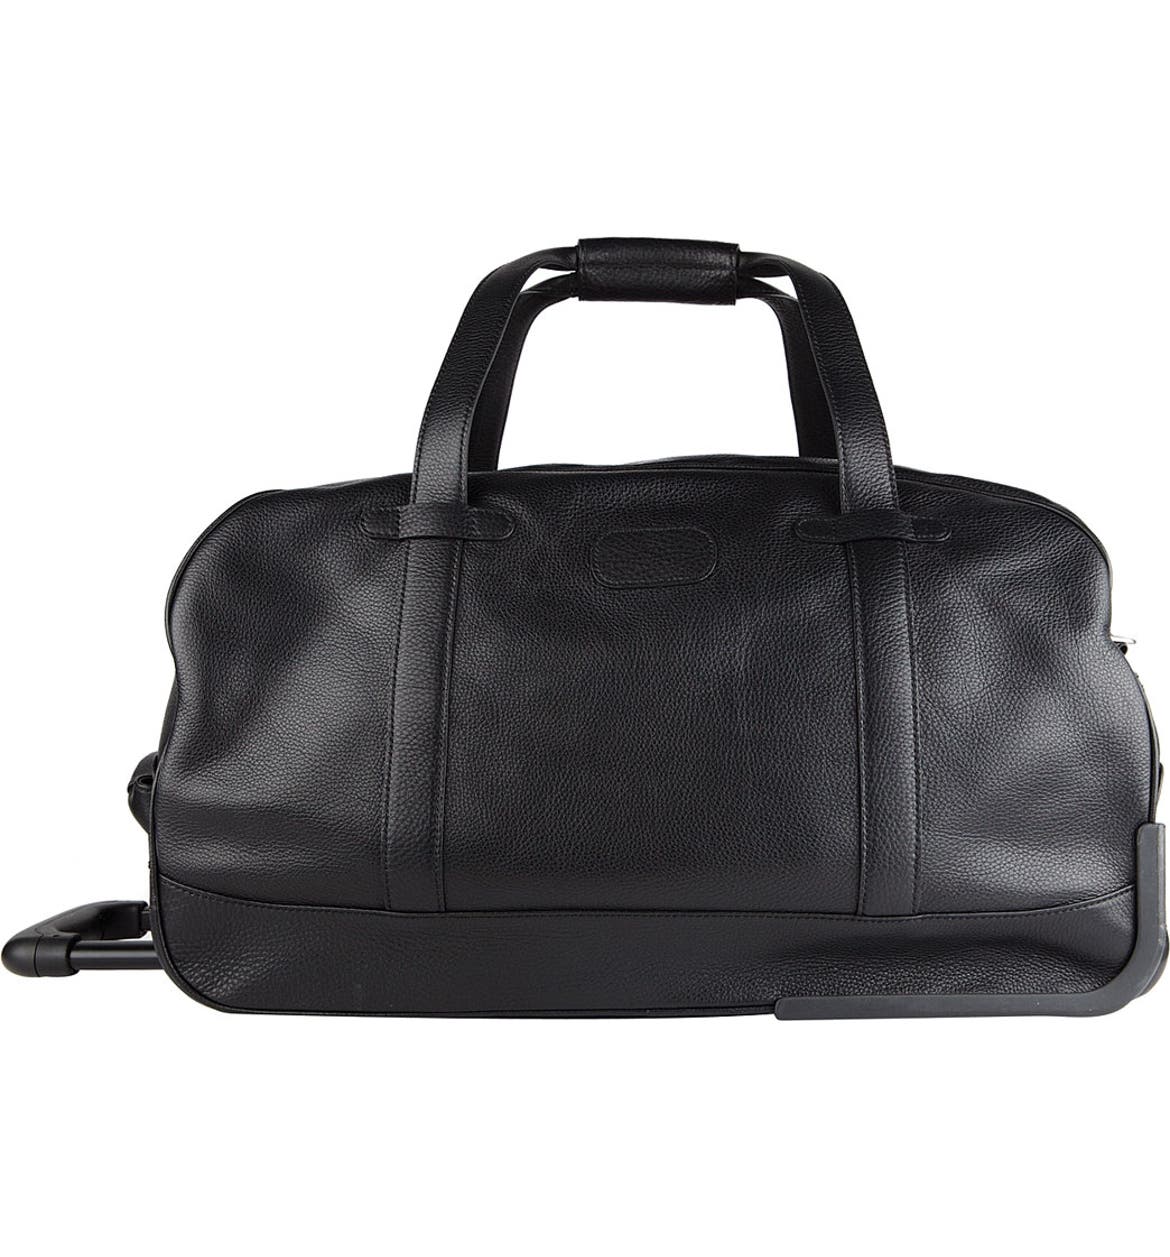 Bosca 'Tribeca Collection' Wheeled Duffel Bag | Nordstrom